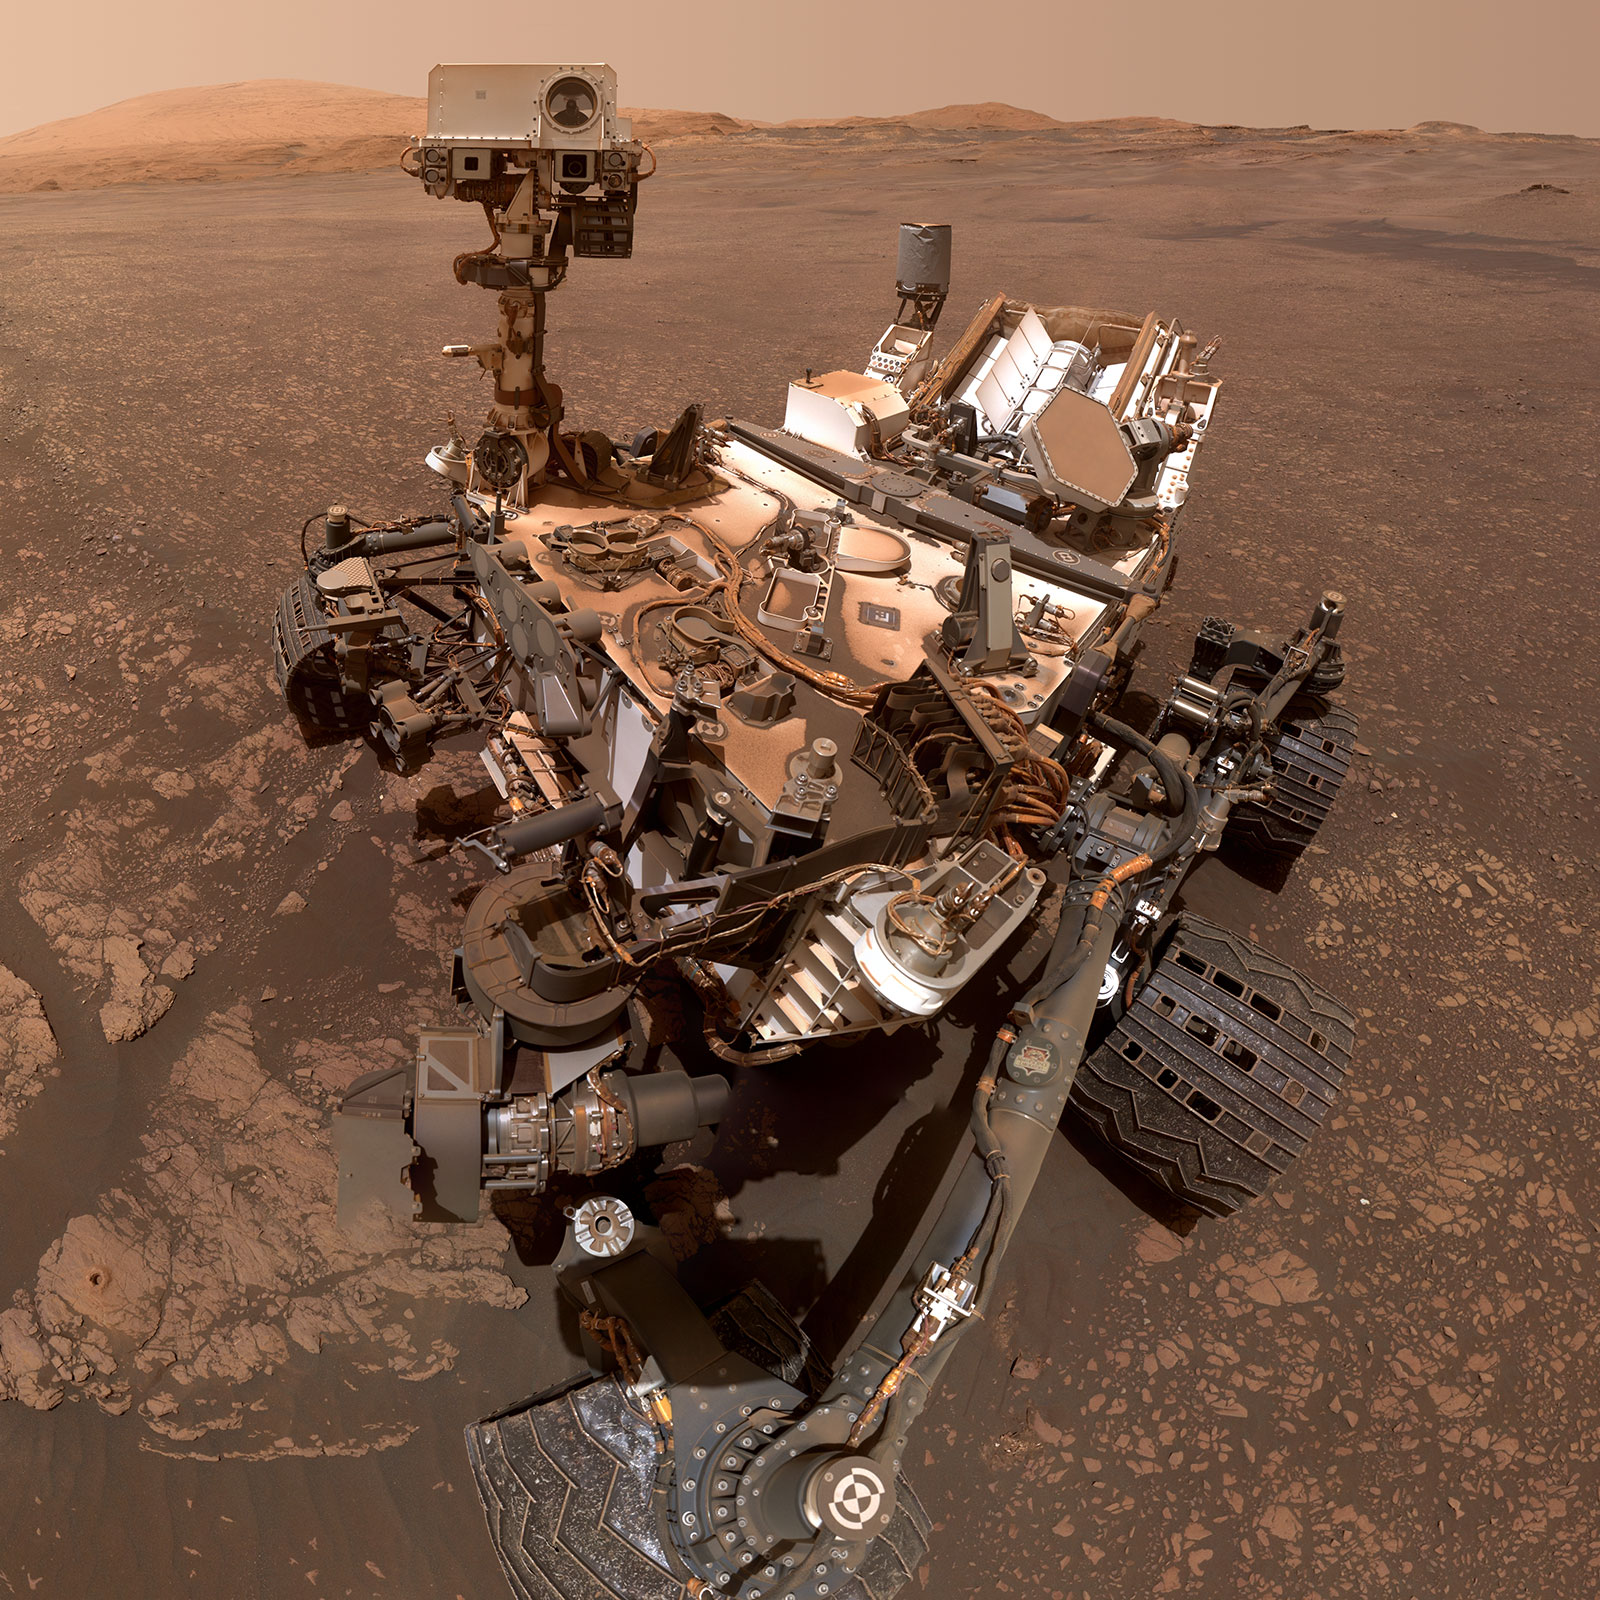 A mosaic of images shows the Curiosity rover covered in red dust and it explores the surface of Mars.